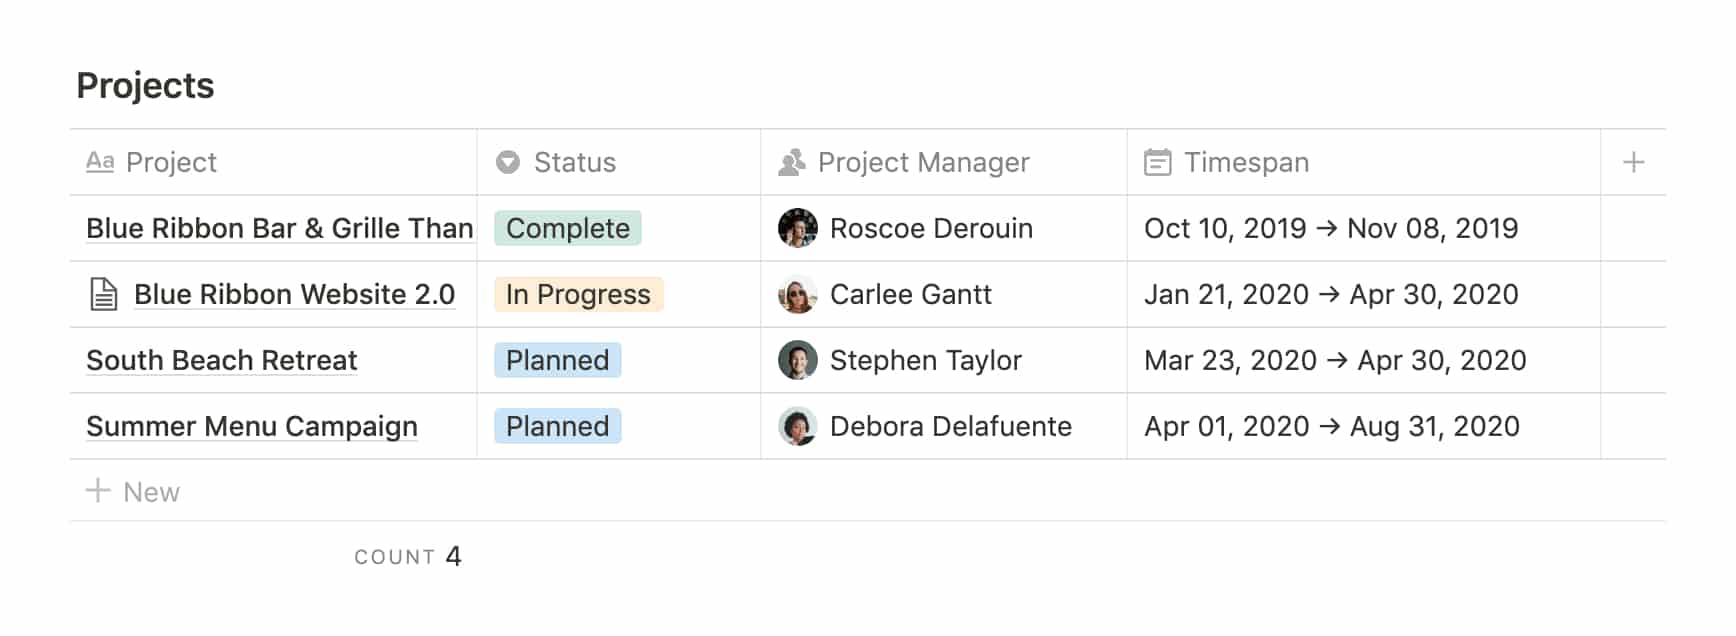 Notion Database: Projects